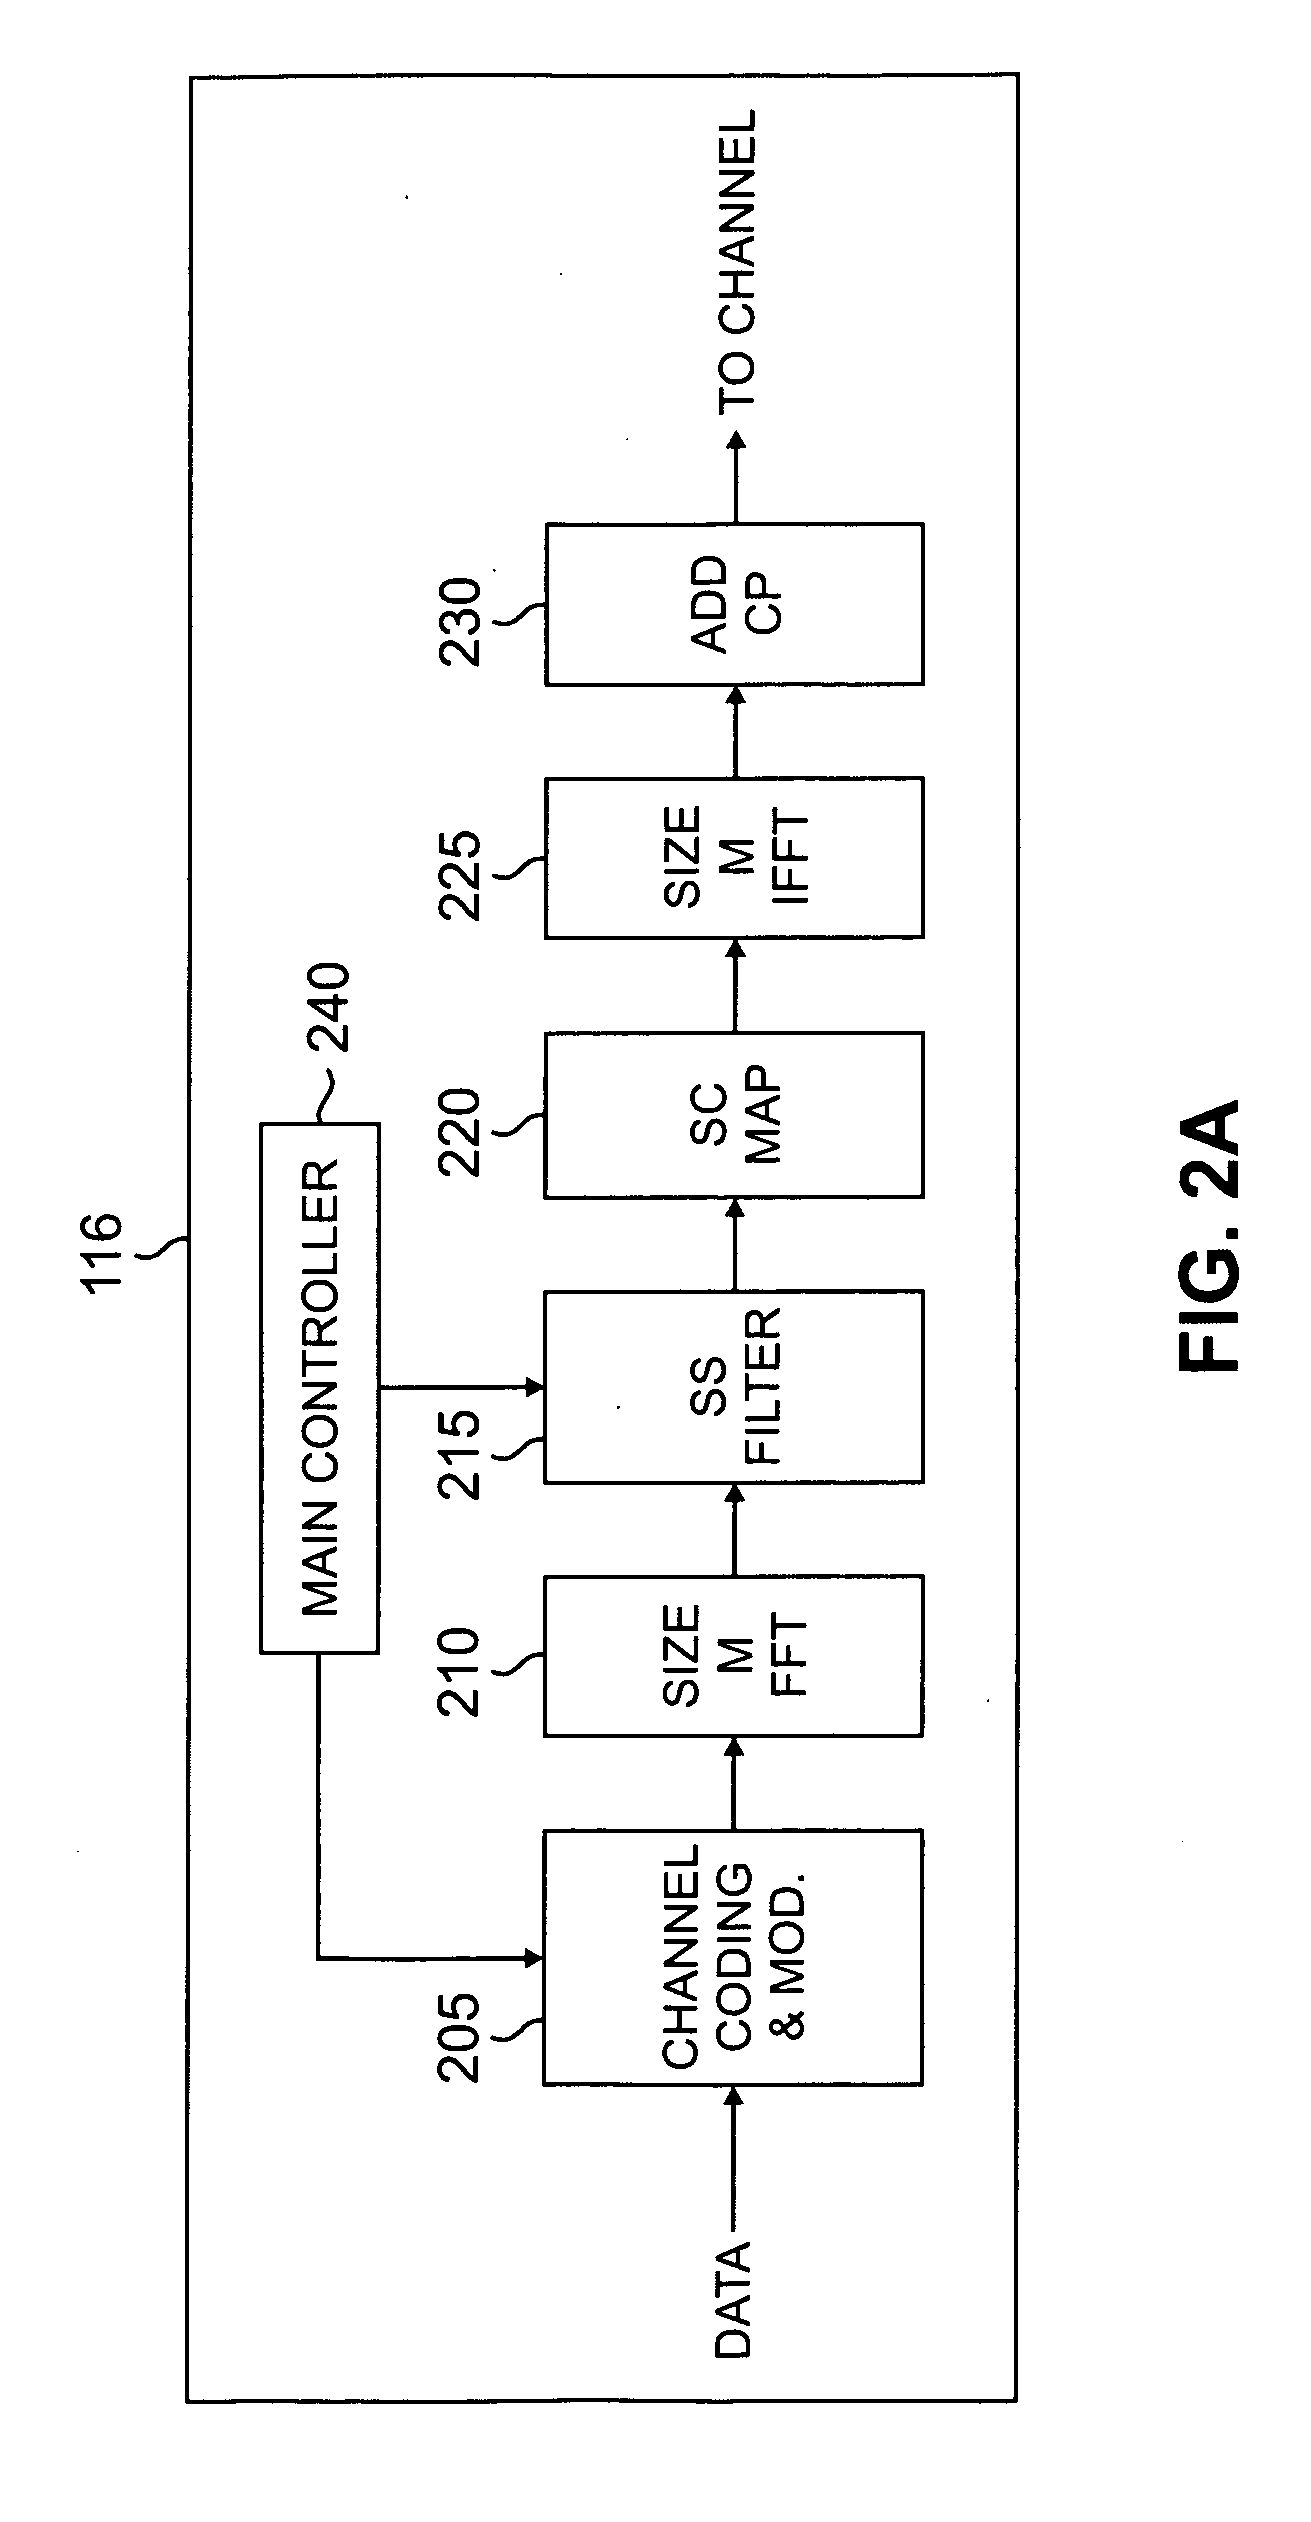 Apparatus and method for selecting modulation and filter roll-off to meet power and bandwidth requirements